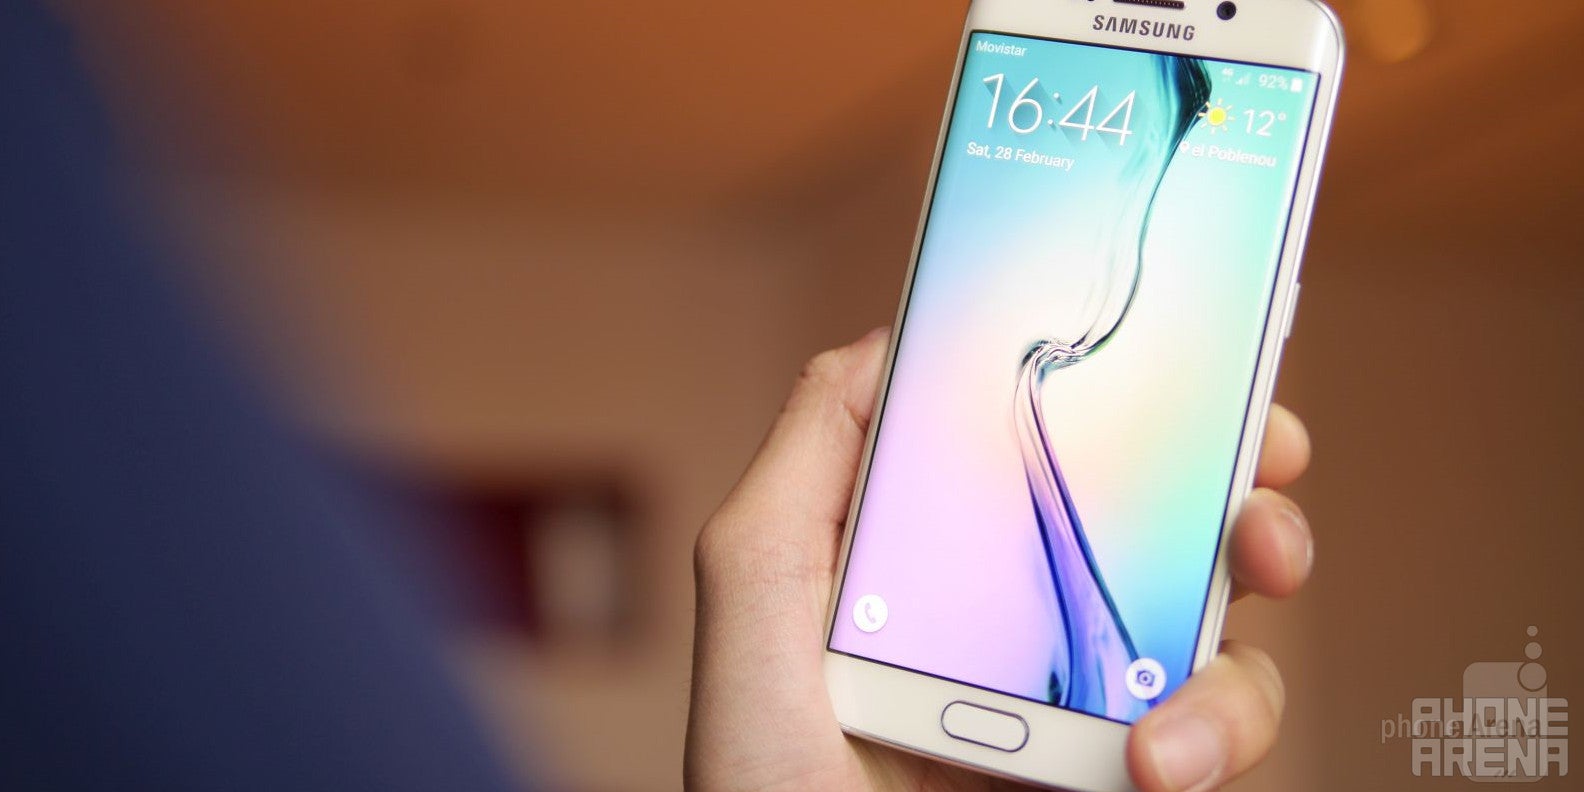 Samsung Galaxy S6 &amp; S6 edge feature easier to operate finger print sensors